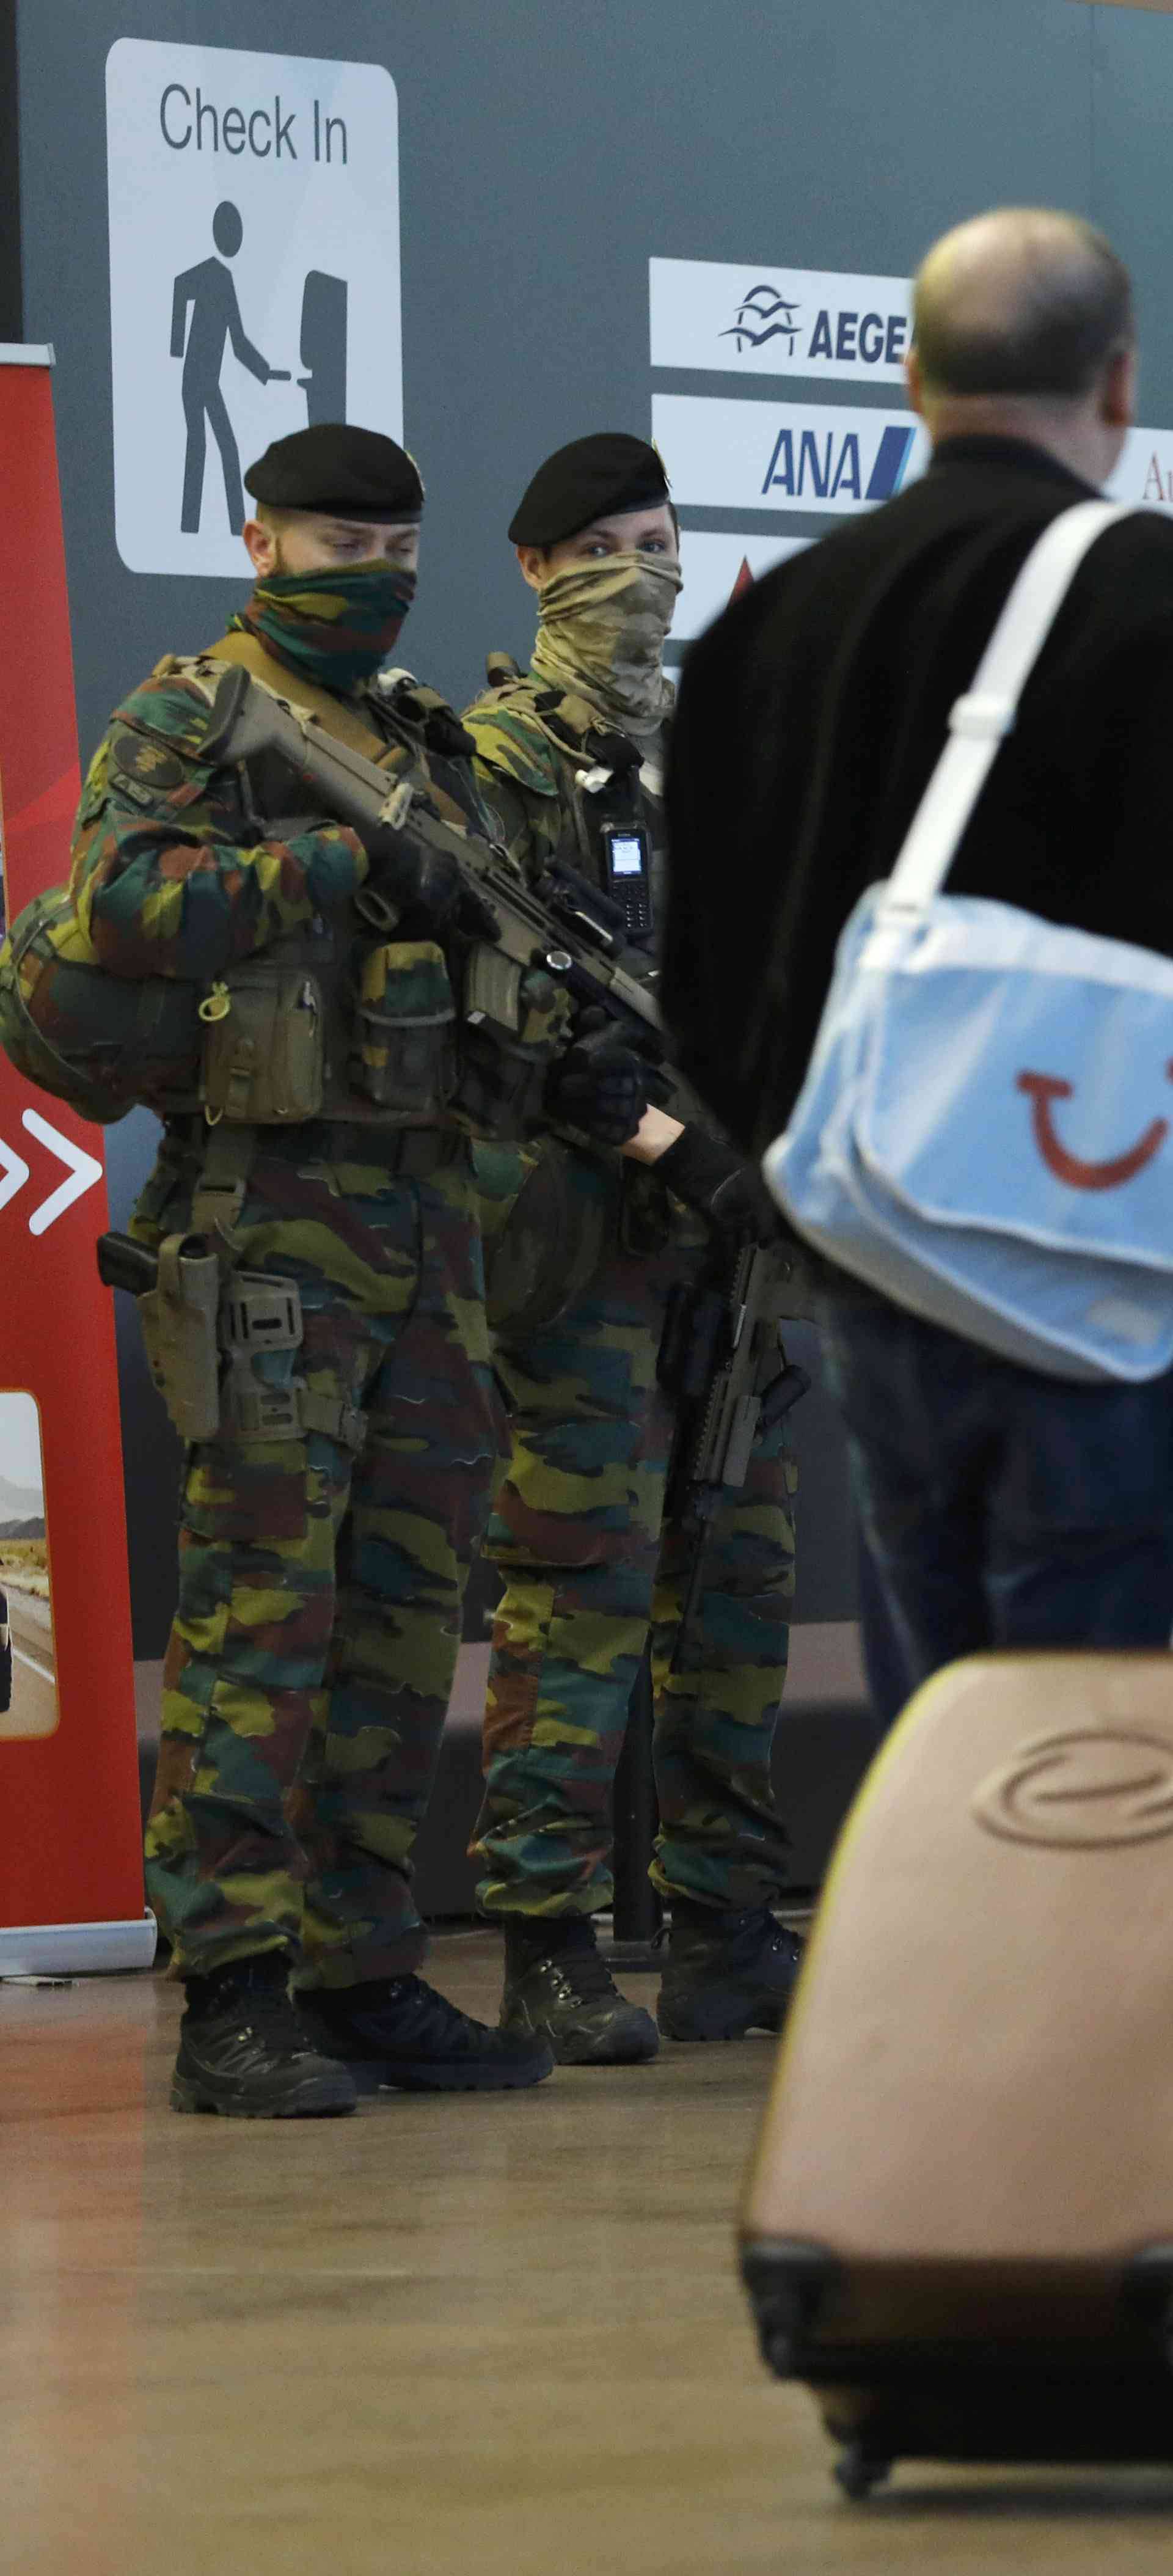 Soldiers patrol in the Zaventem airport prior to a ceremony commemorating the first anniversary of twin attacks at Brussels airport and a metro train in Brussels